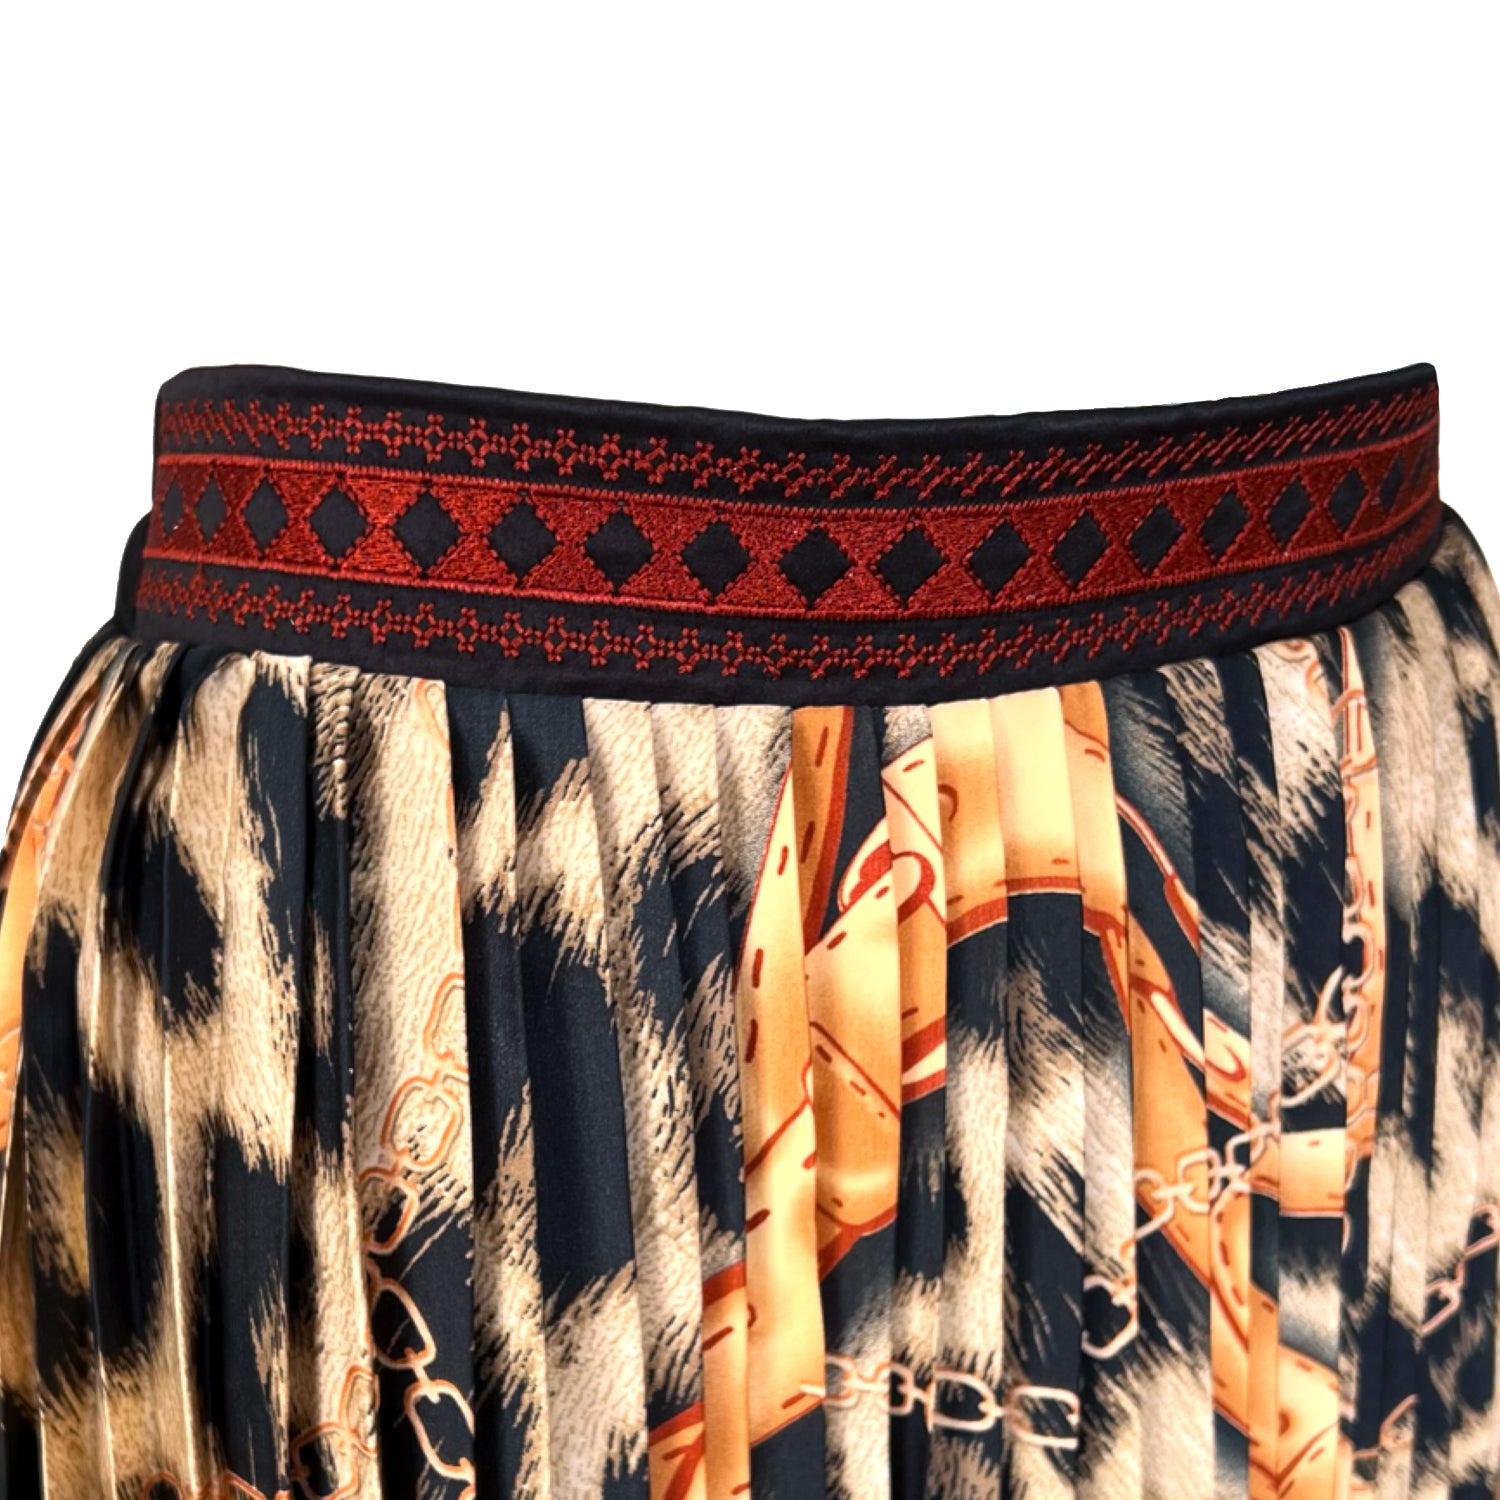 Embroidered Pleated Scarf Midi Skirt in Animal Print